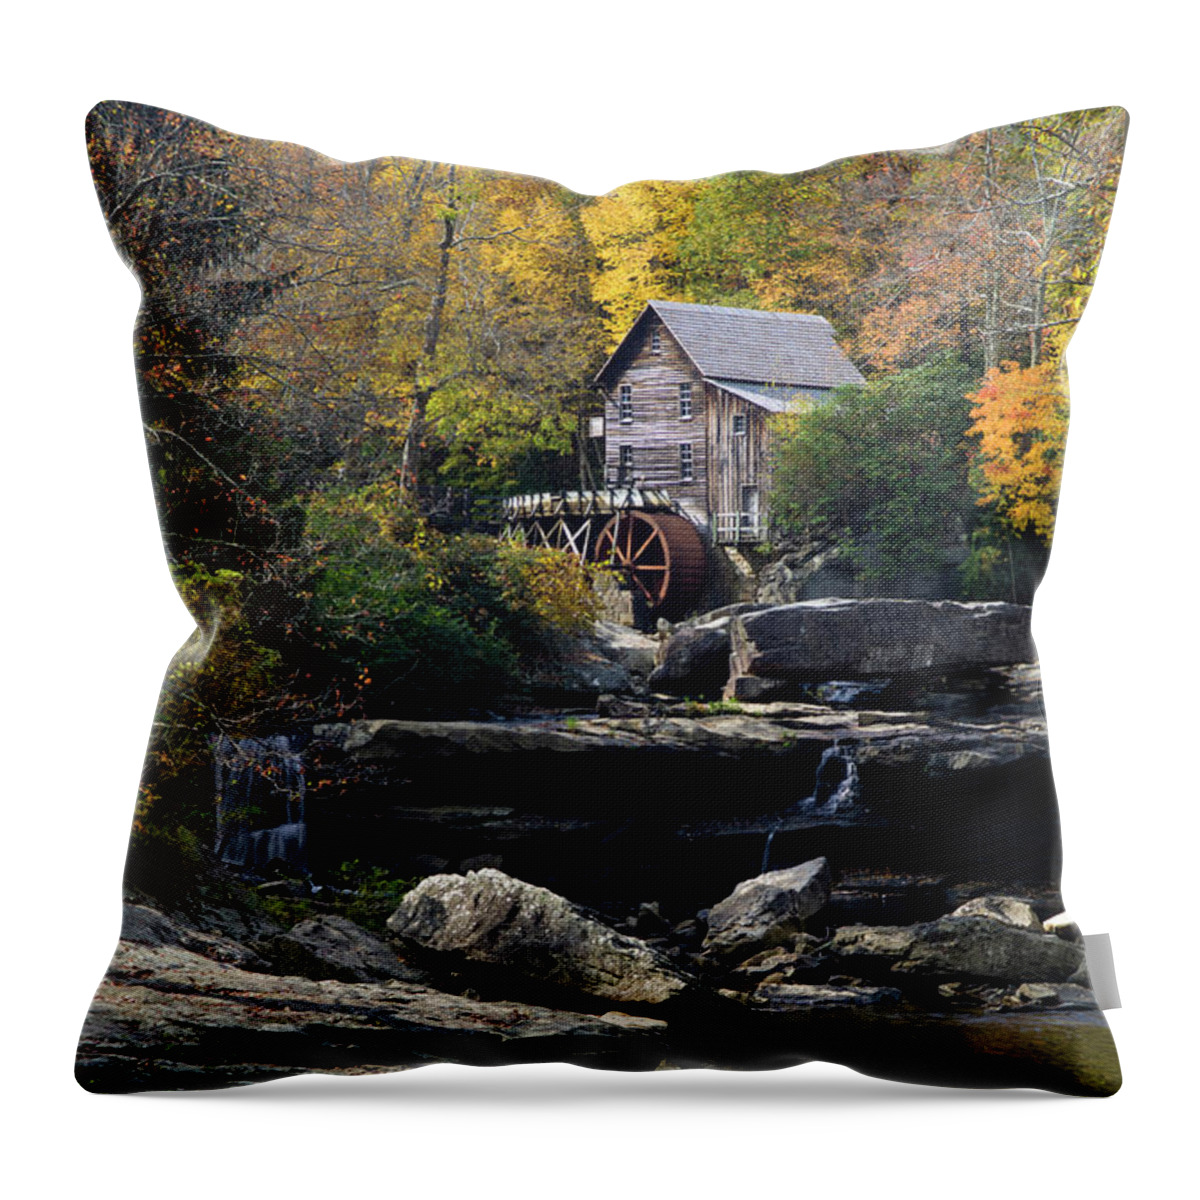 Glade Throw Pillow featuring the photograph Glade Creek Grist Mill - D009975 by Daniel Dempster